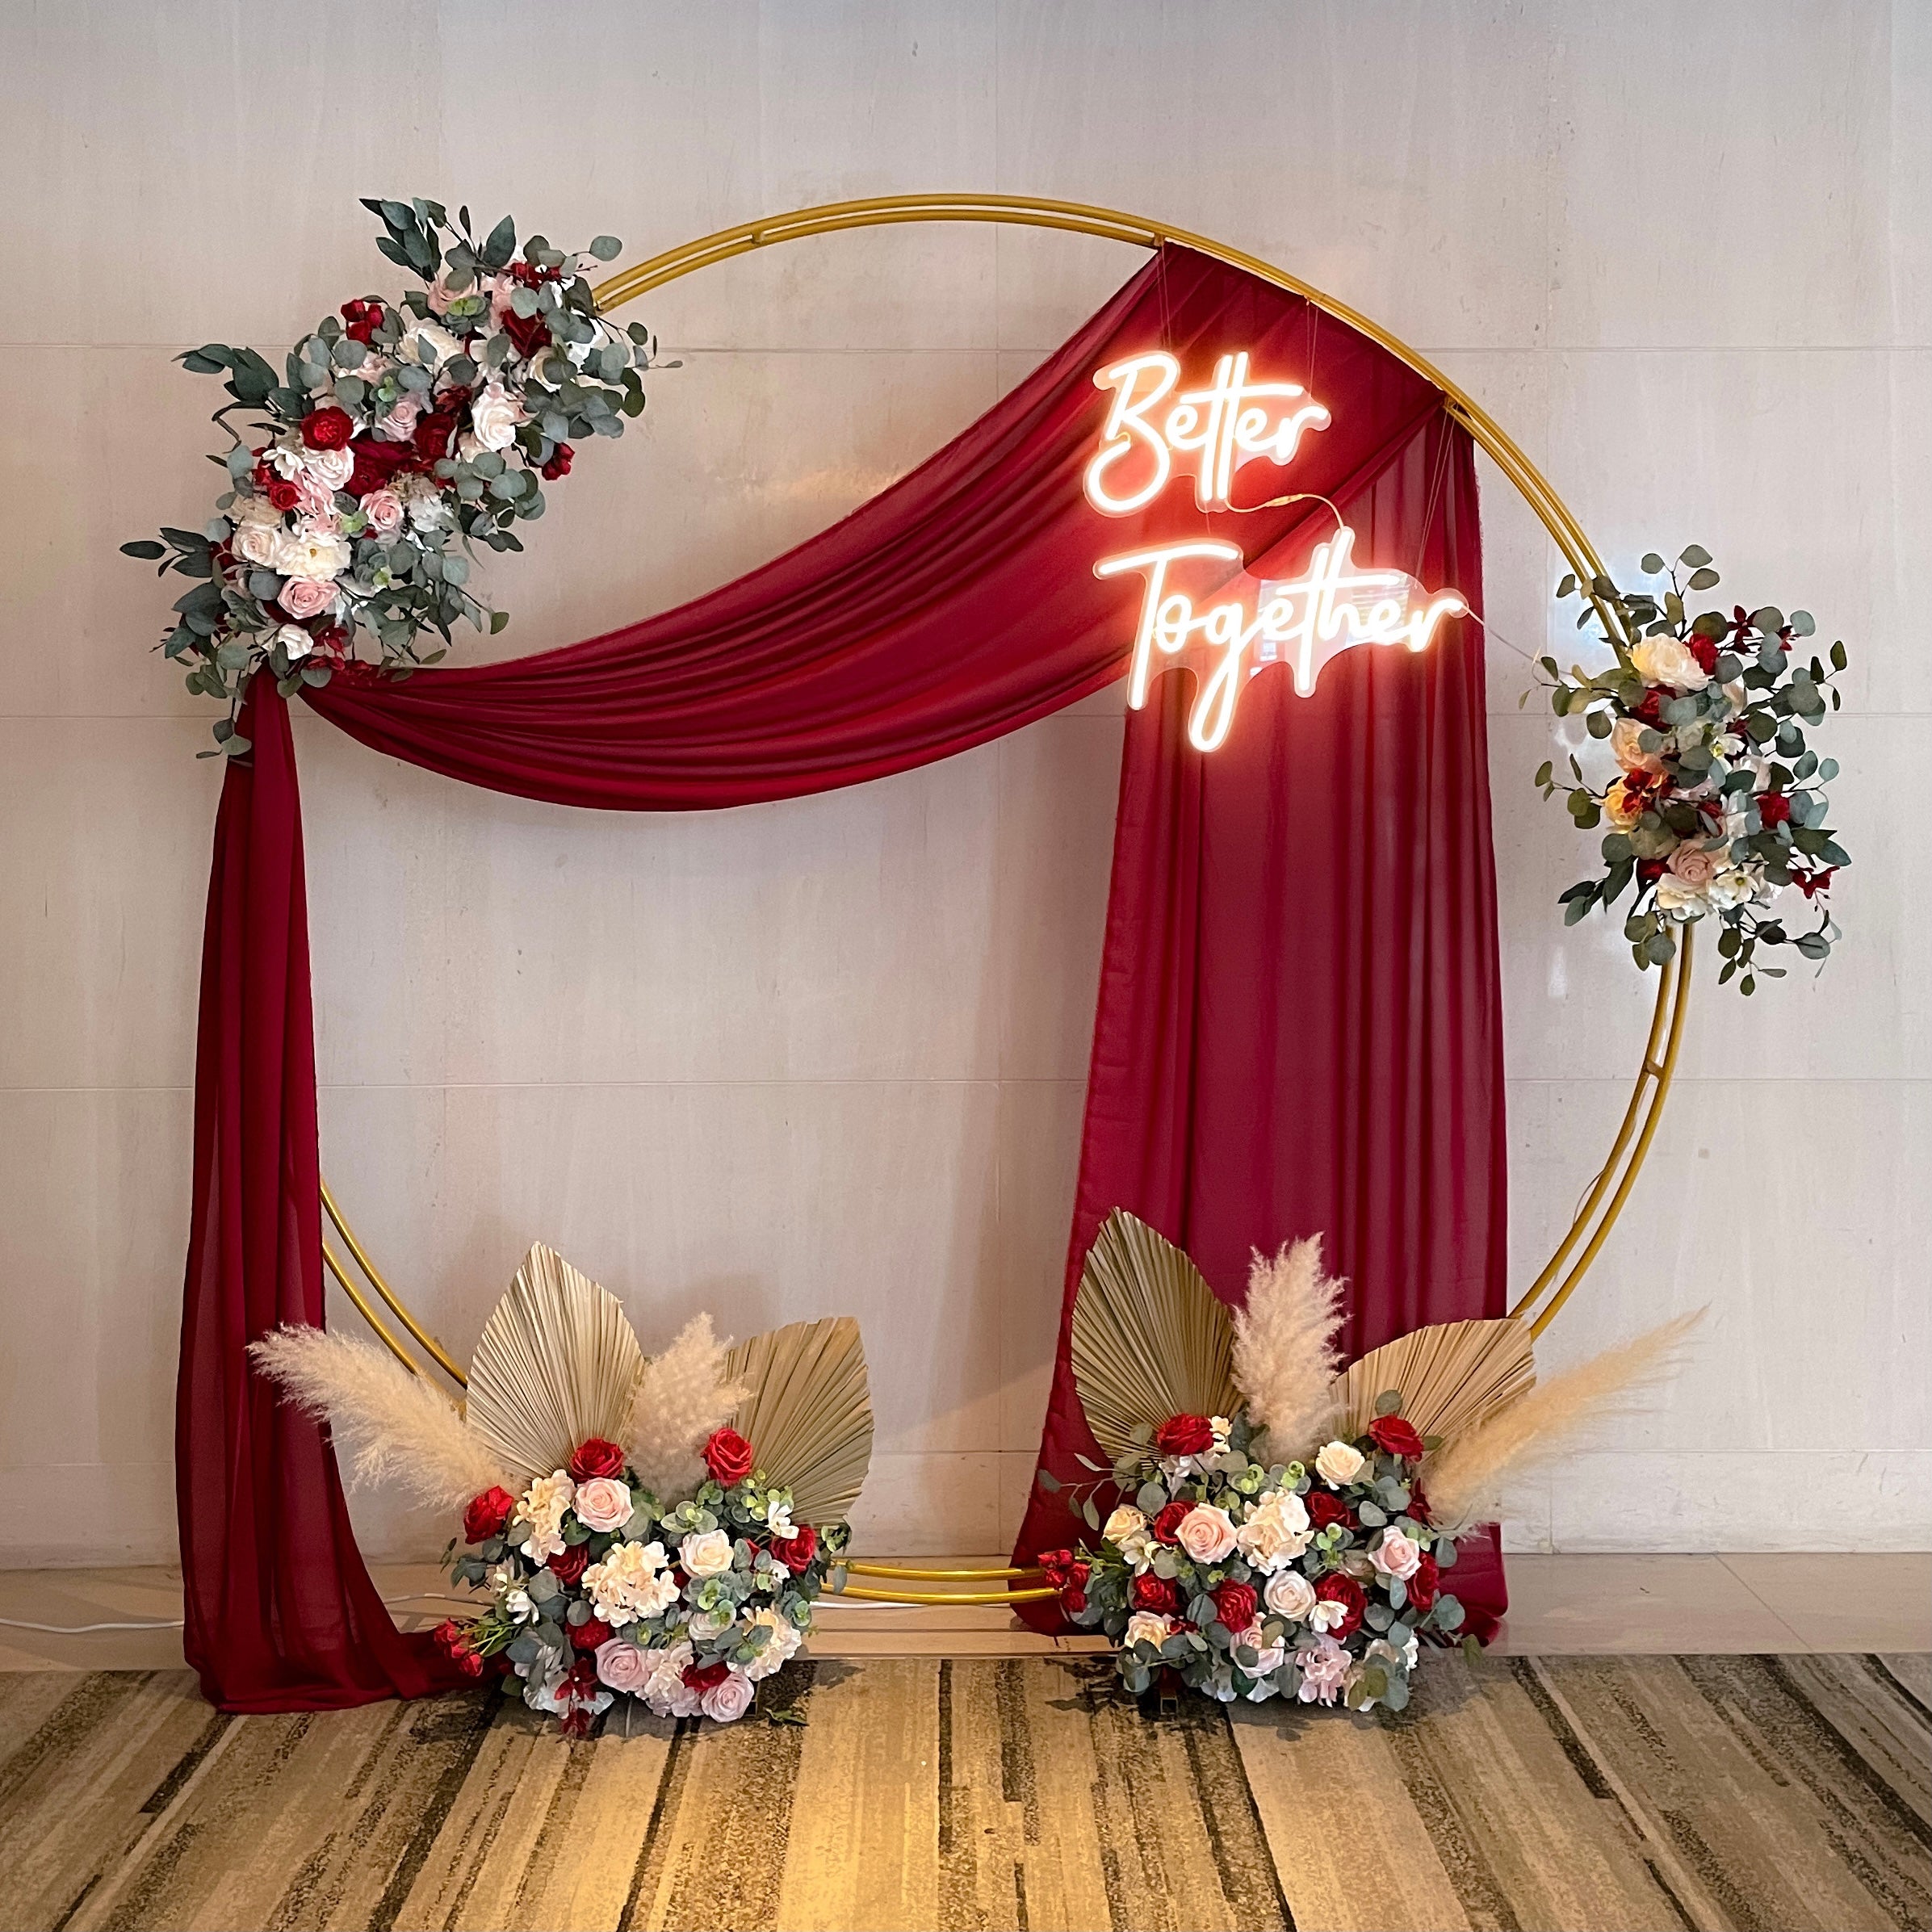 Wedding Stage Decor in Singapore - Red & Pink Theme Floral Arch with Better Together Neon Signage suitable for Indoor/Outdoor (Venue: Amara Sanctuary Resort Sentosa)